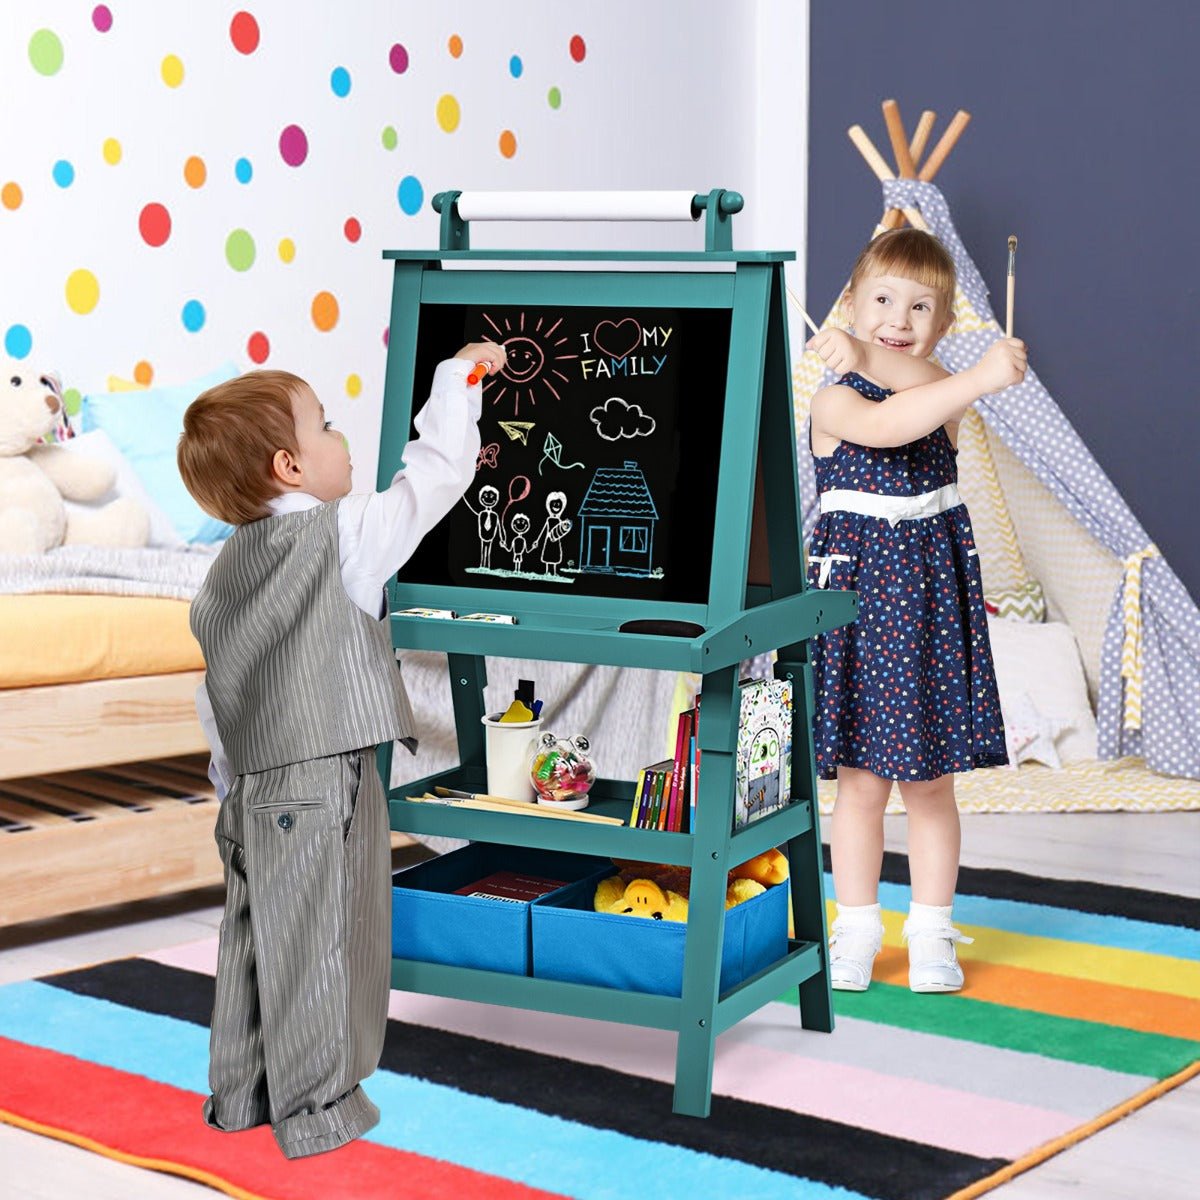 Experience Artistic Magic with the Teal Blue Easel - Shop Today!